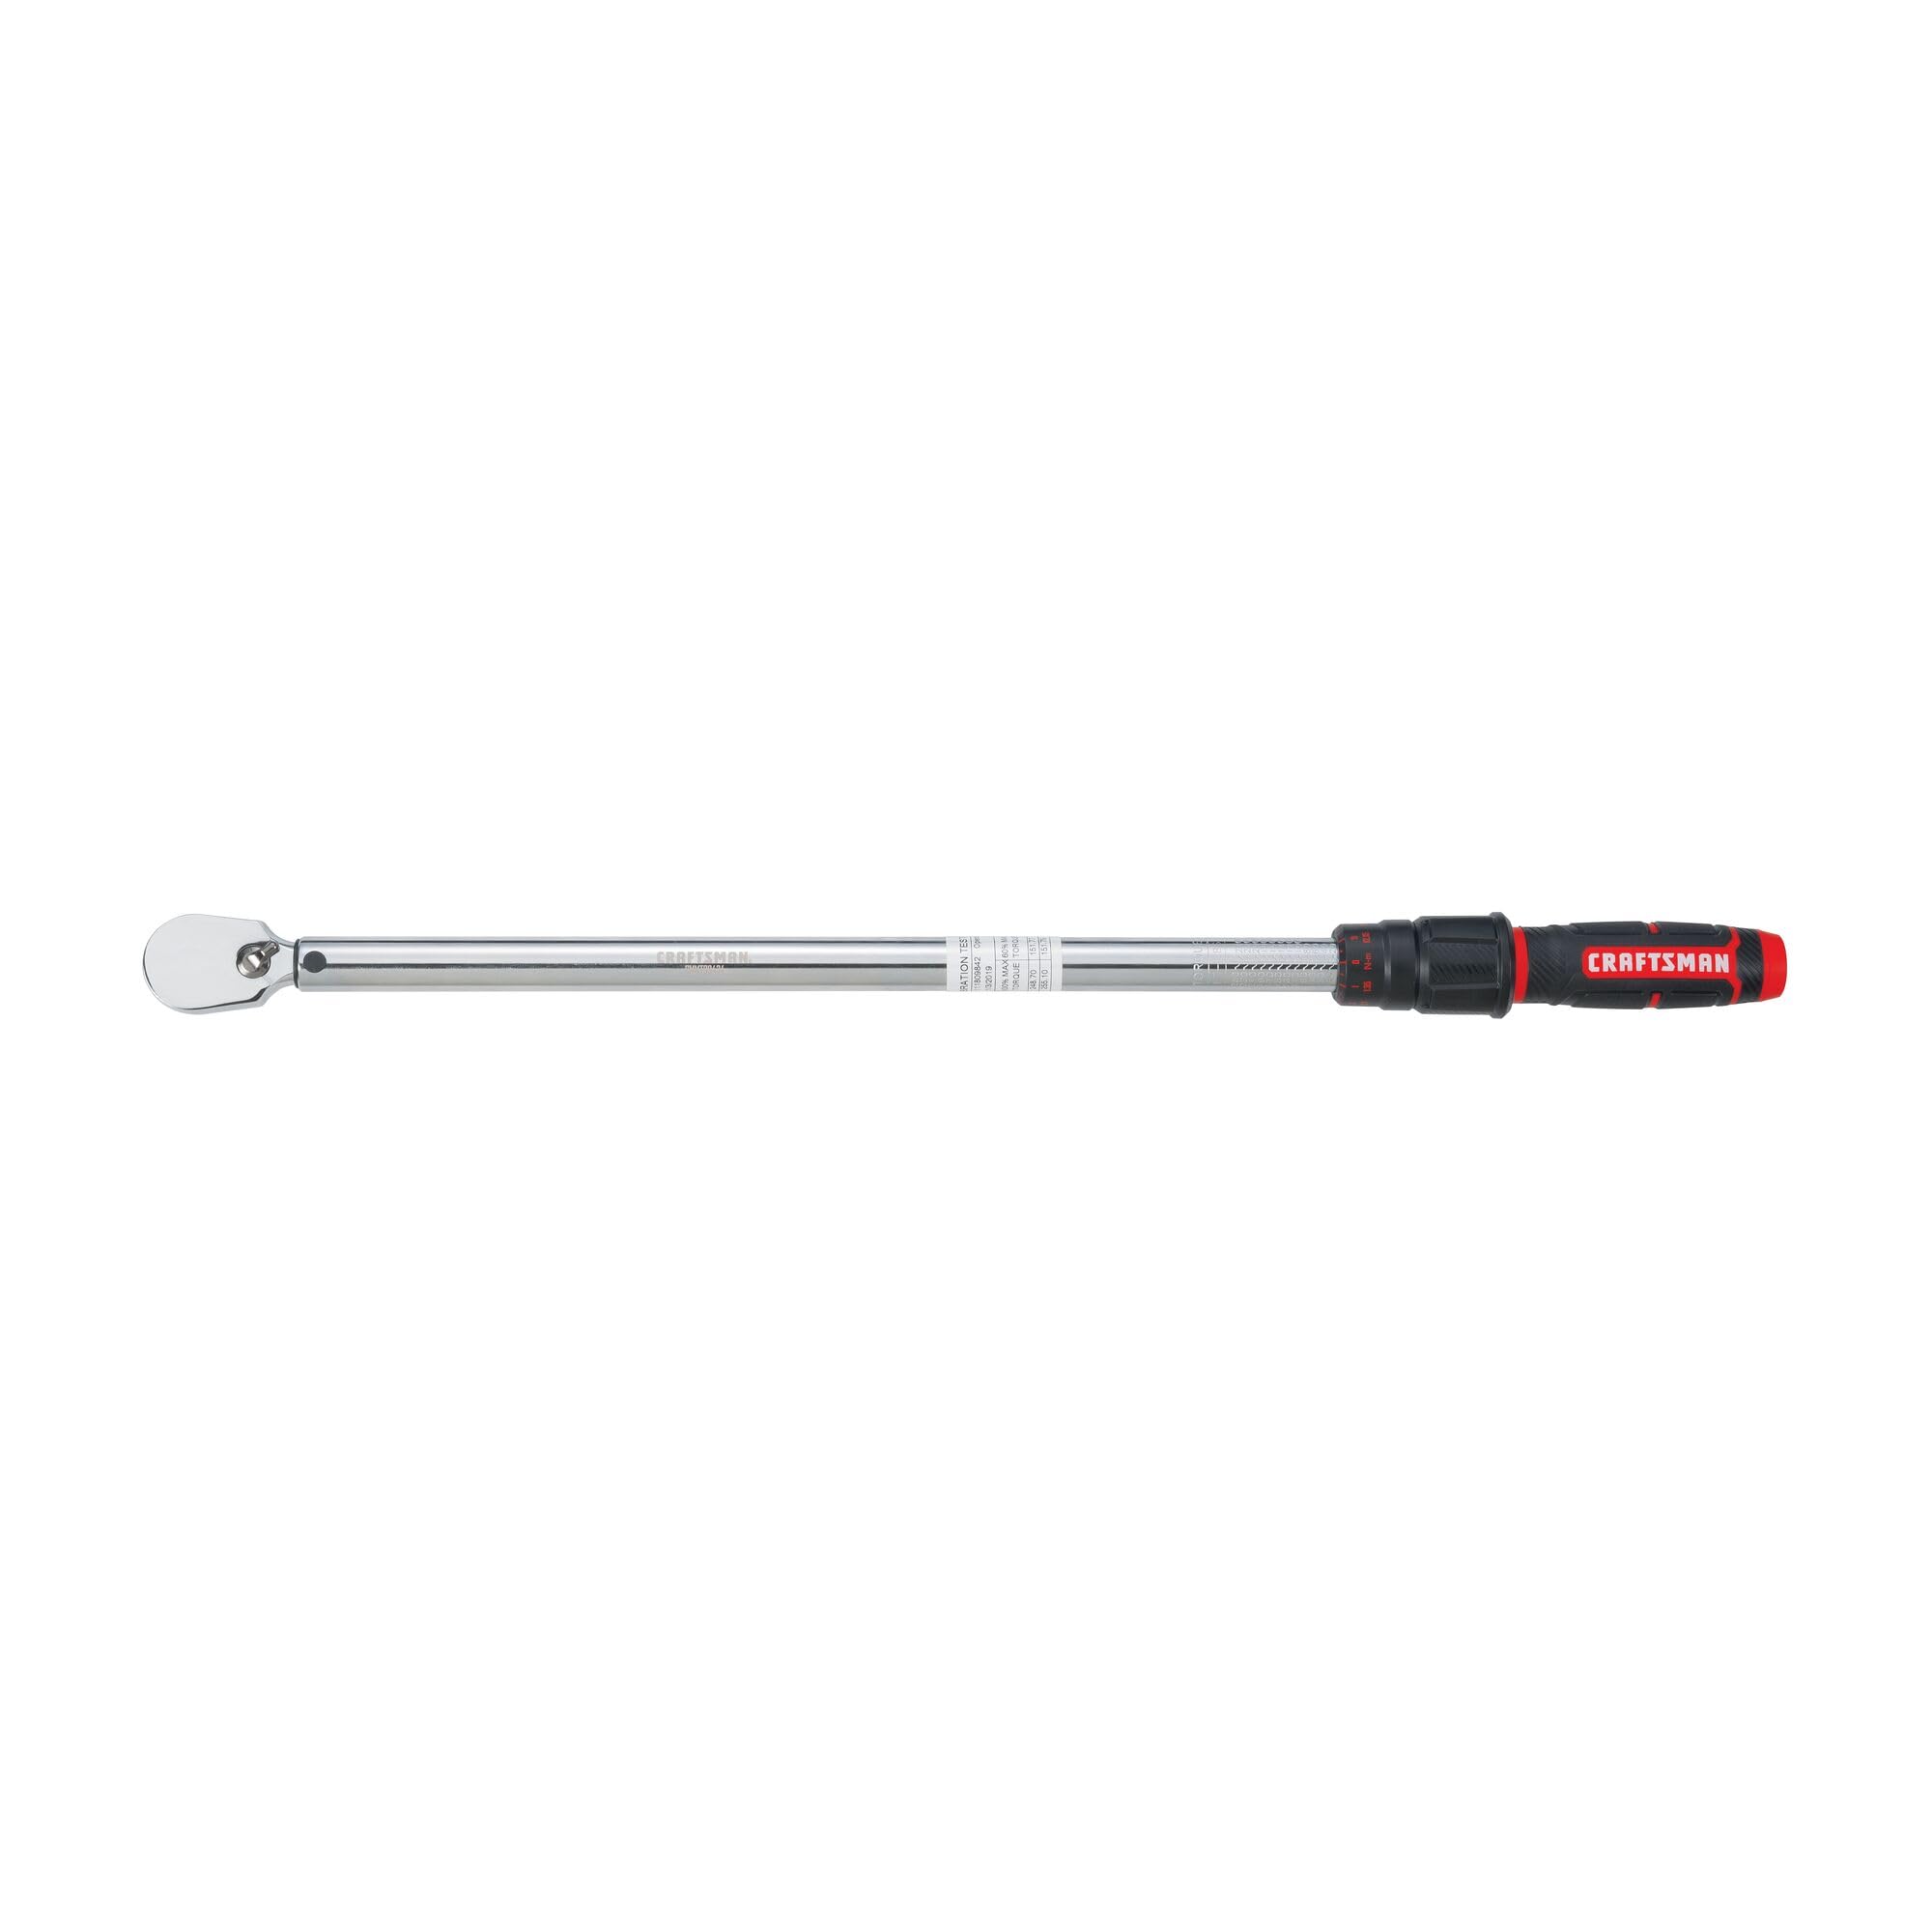 Craftsman 1/2" Drive Torque Wrench (50-ft lb to 250-ft lb) $65 & More + Free Shipping